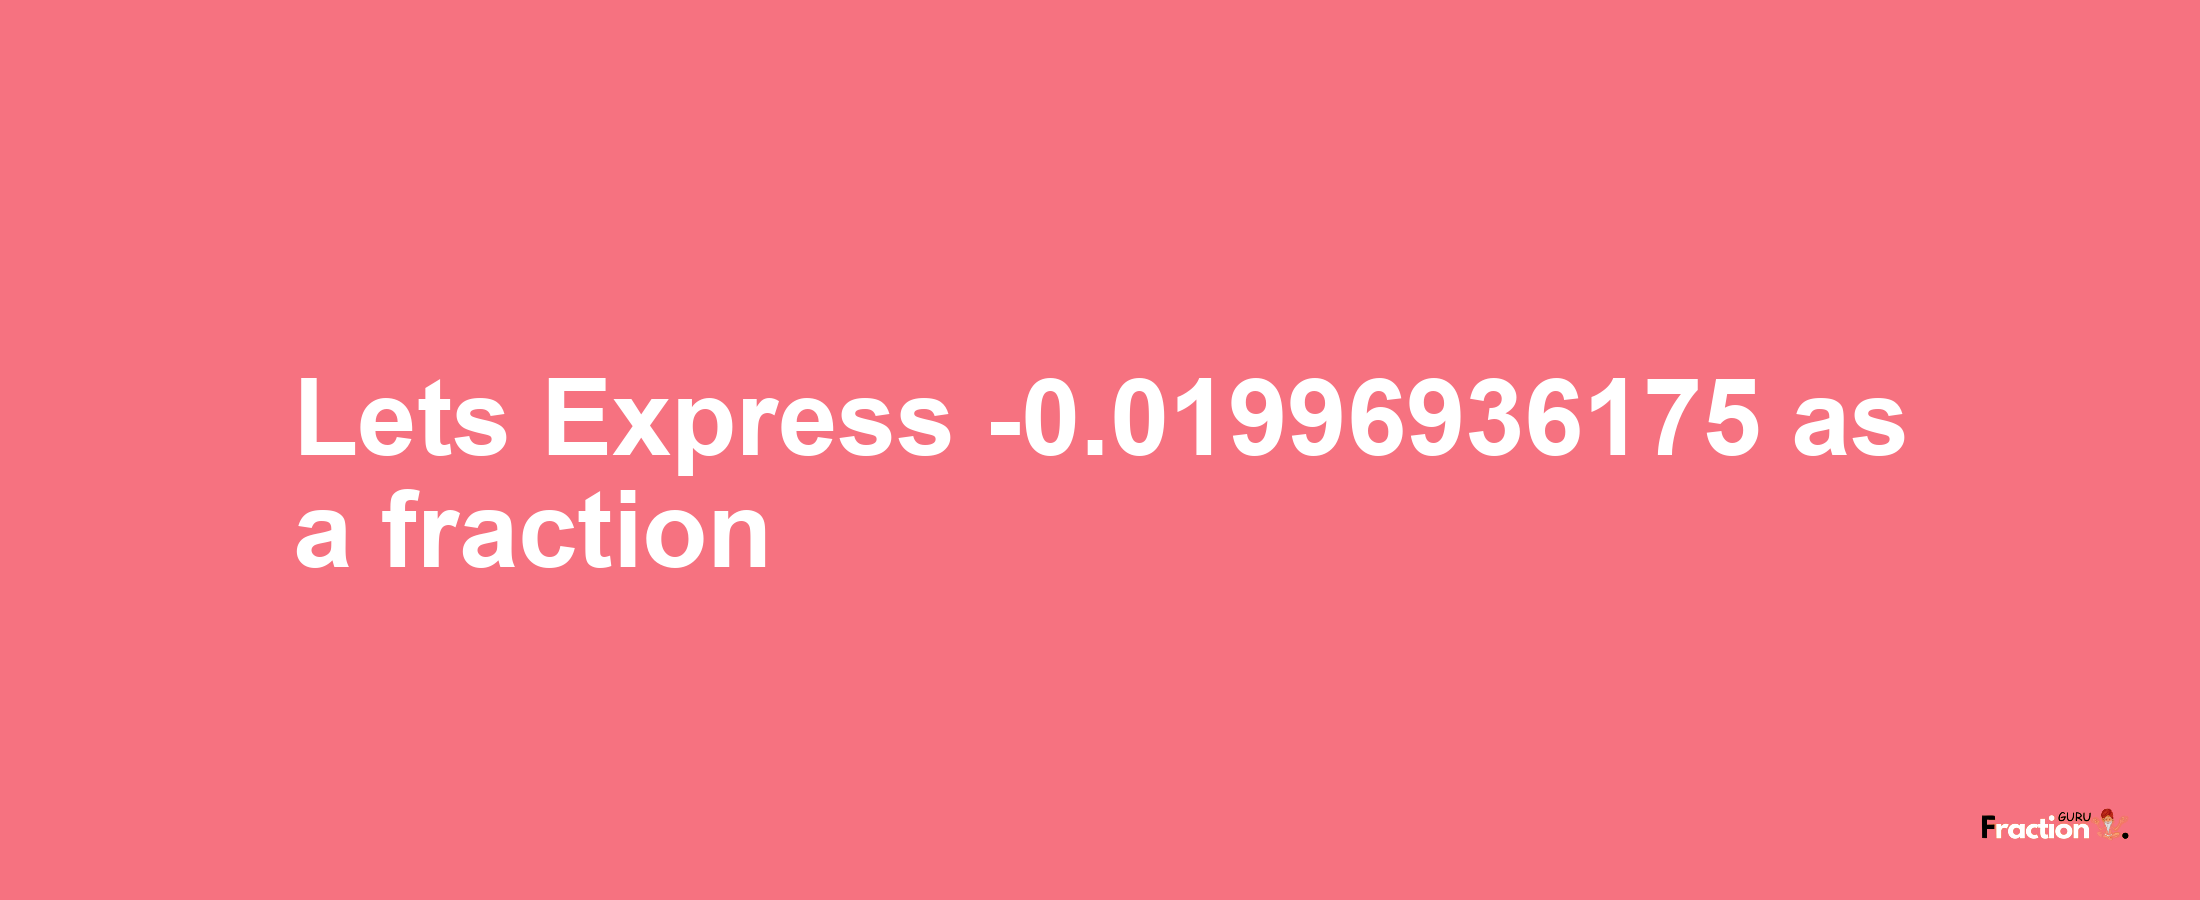 Lets Express -0.01996936175 as afraction